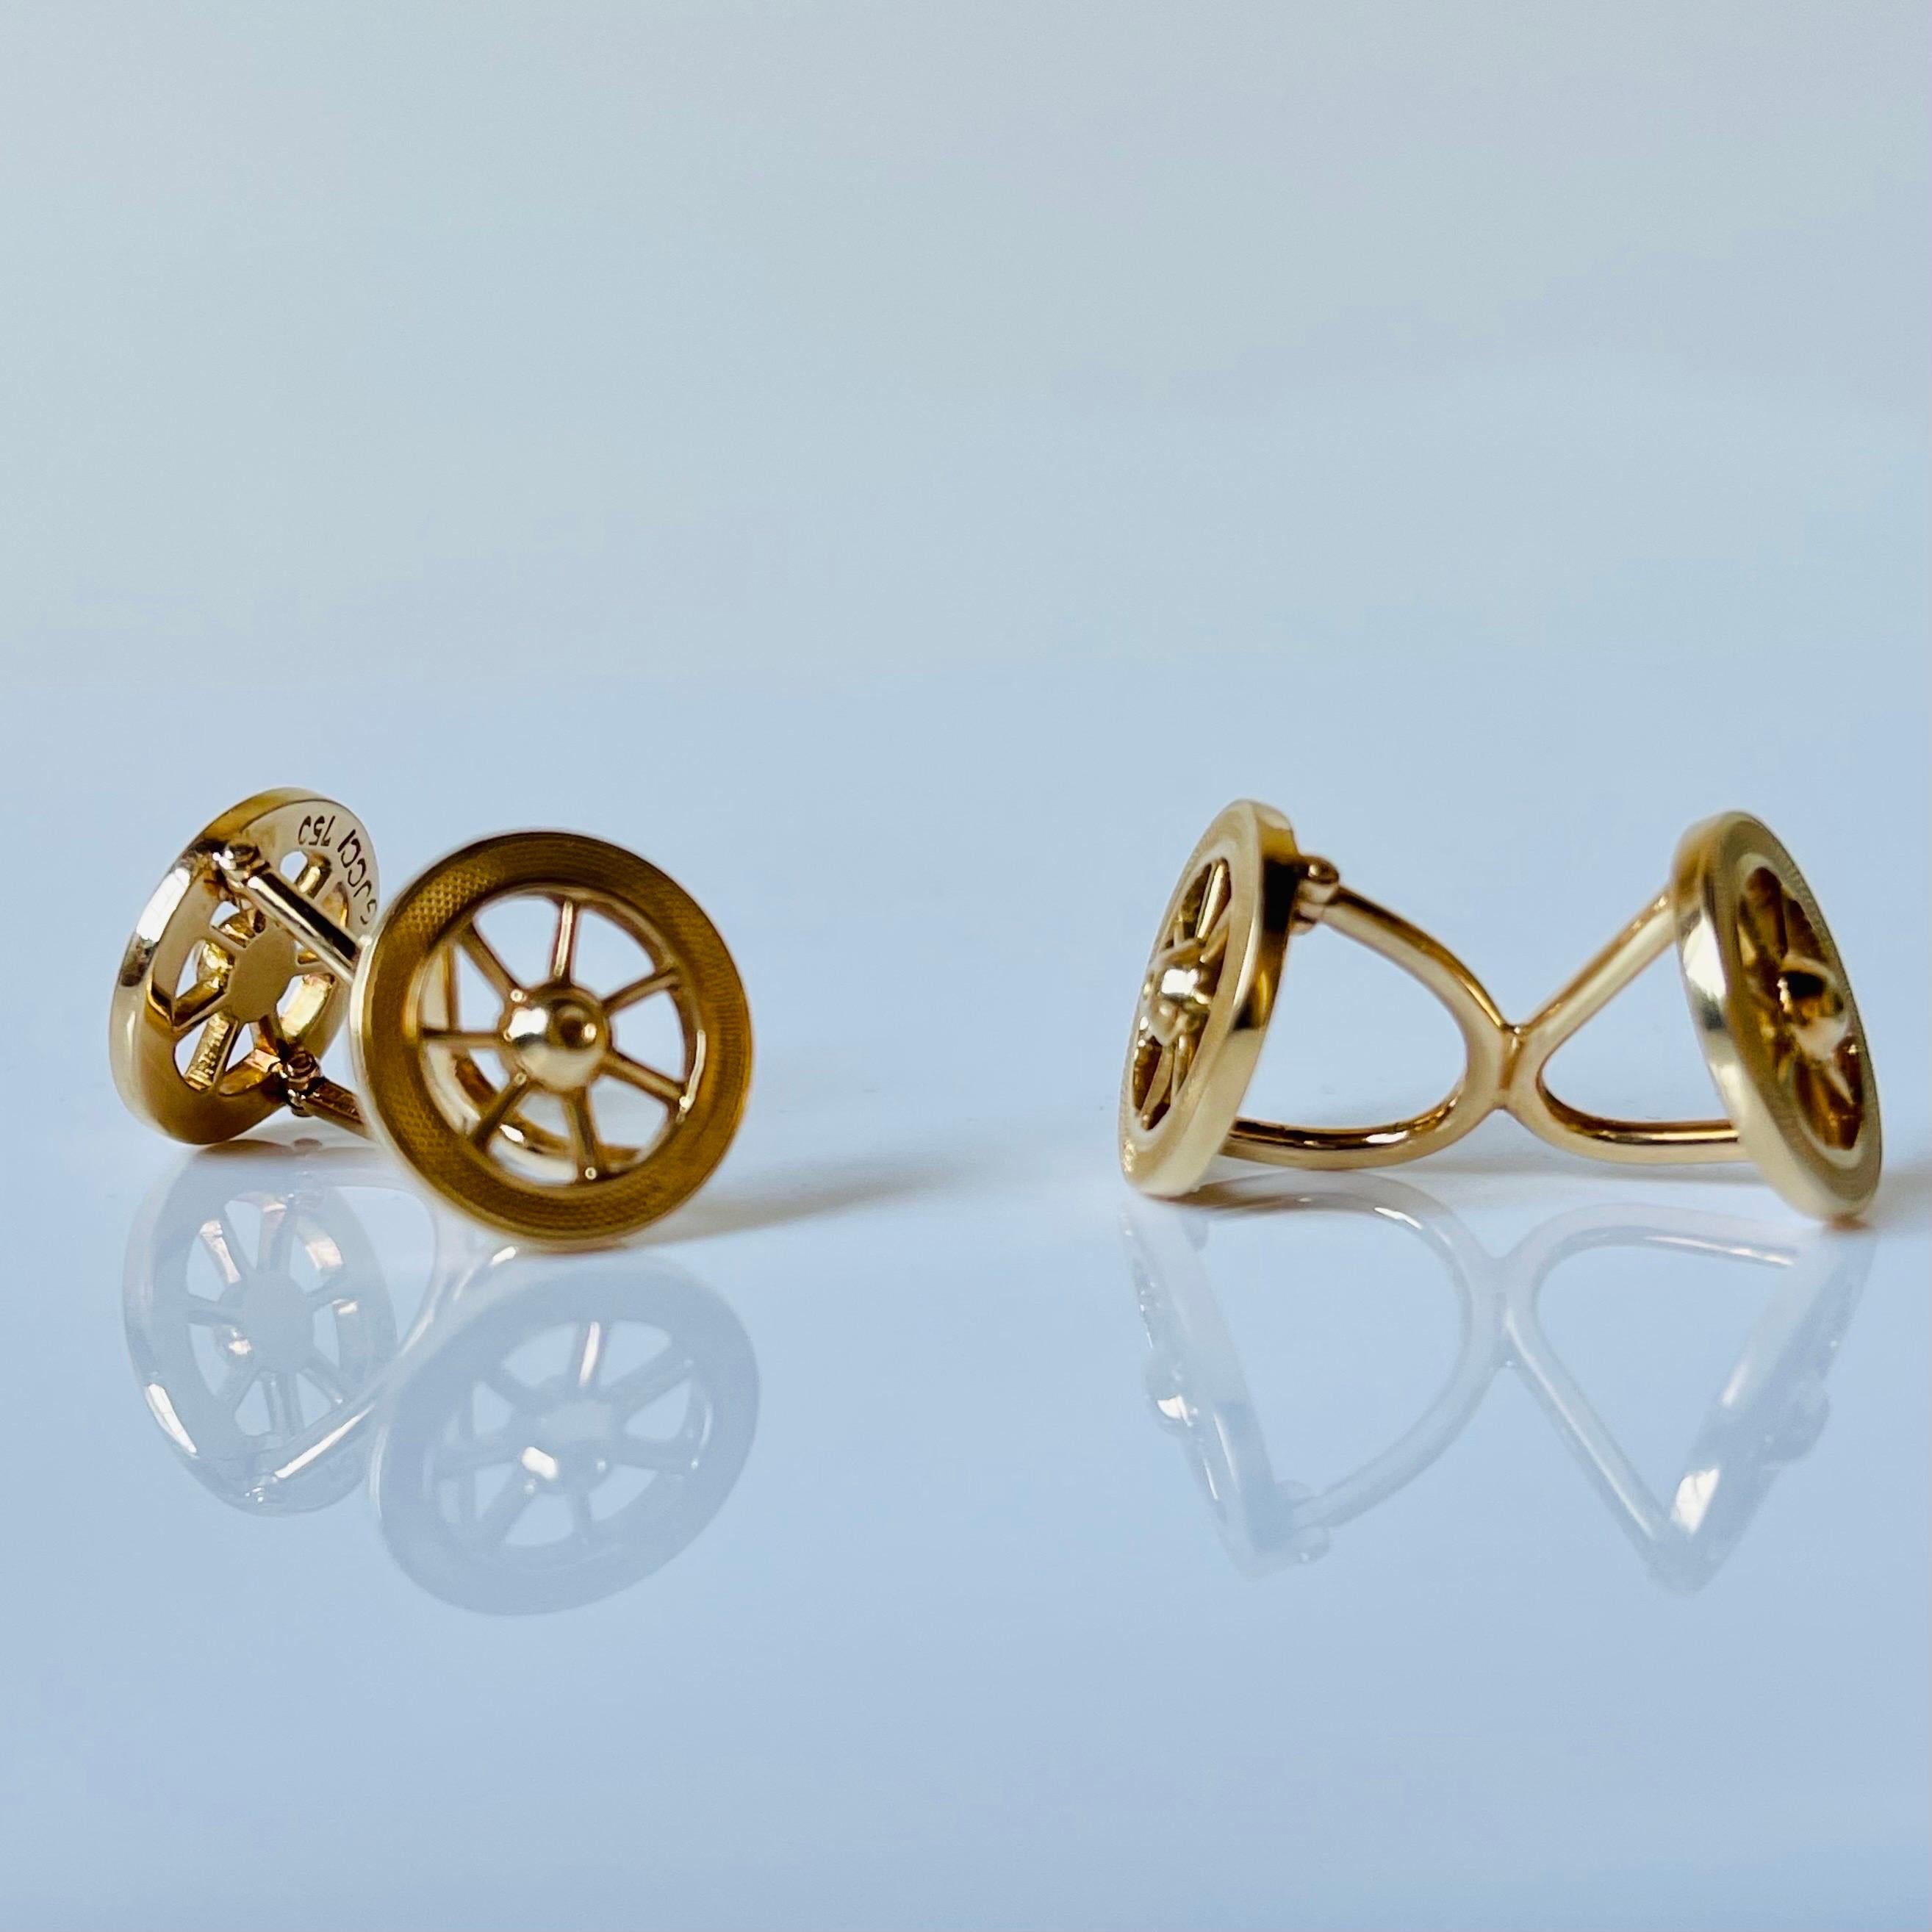 An elegant pair of vintage gold car wheel cufflinks, signed Gucci, mounted in 18K gold, stamped 750, Italy, circa 1980. Two-sided finely engraved car wheel design featuring a movable wheel for easy entry into a shirt or jacket, in an excellent